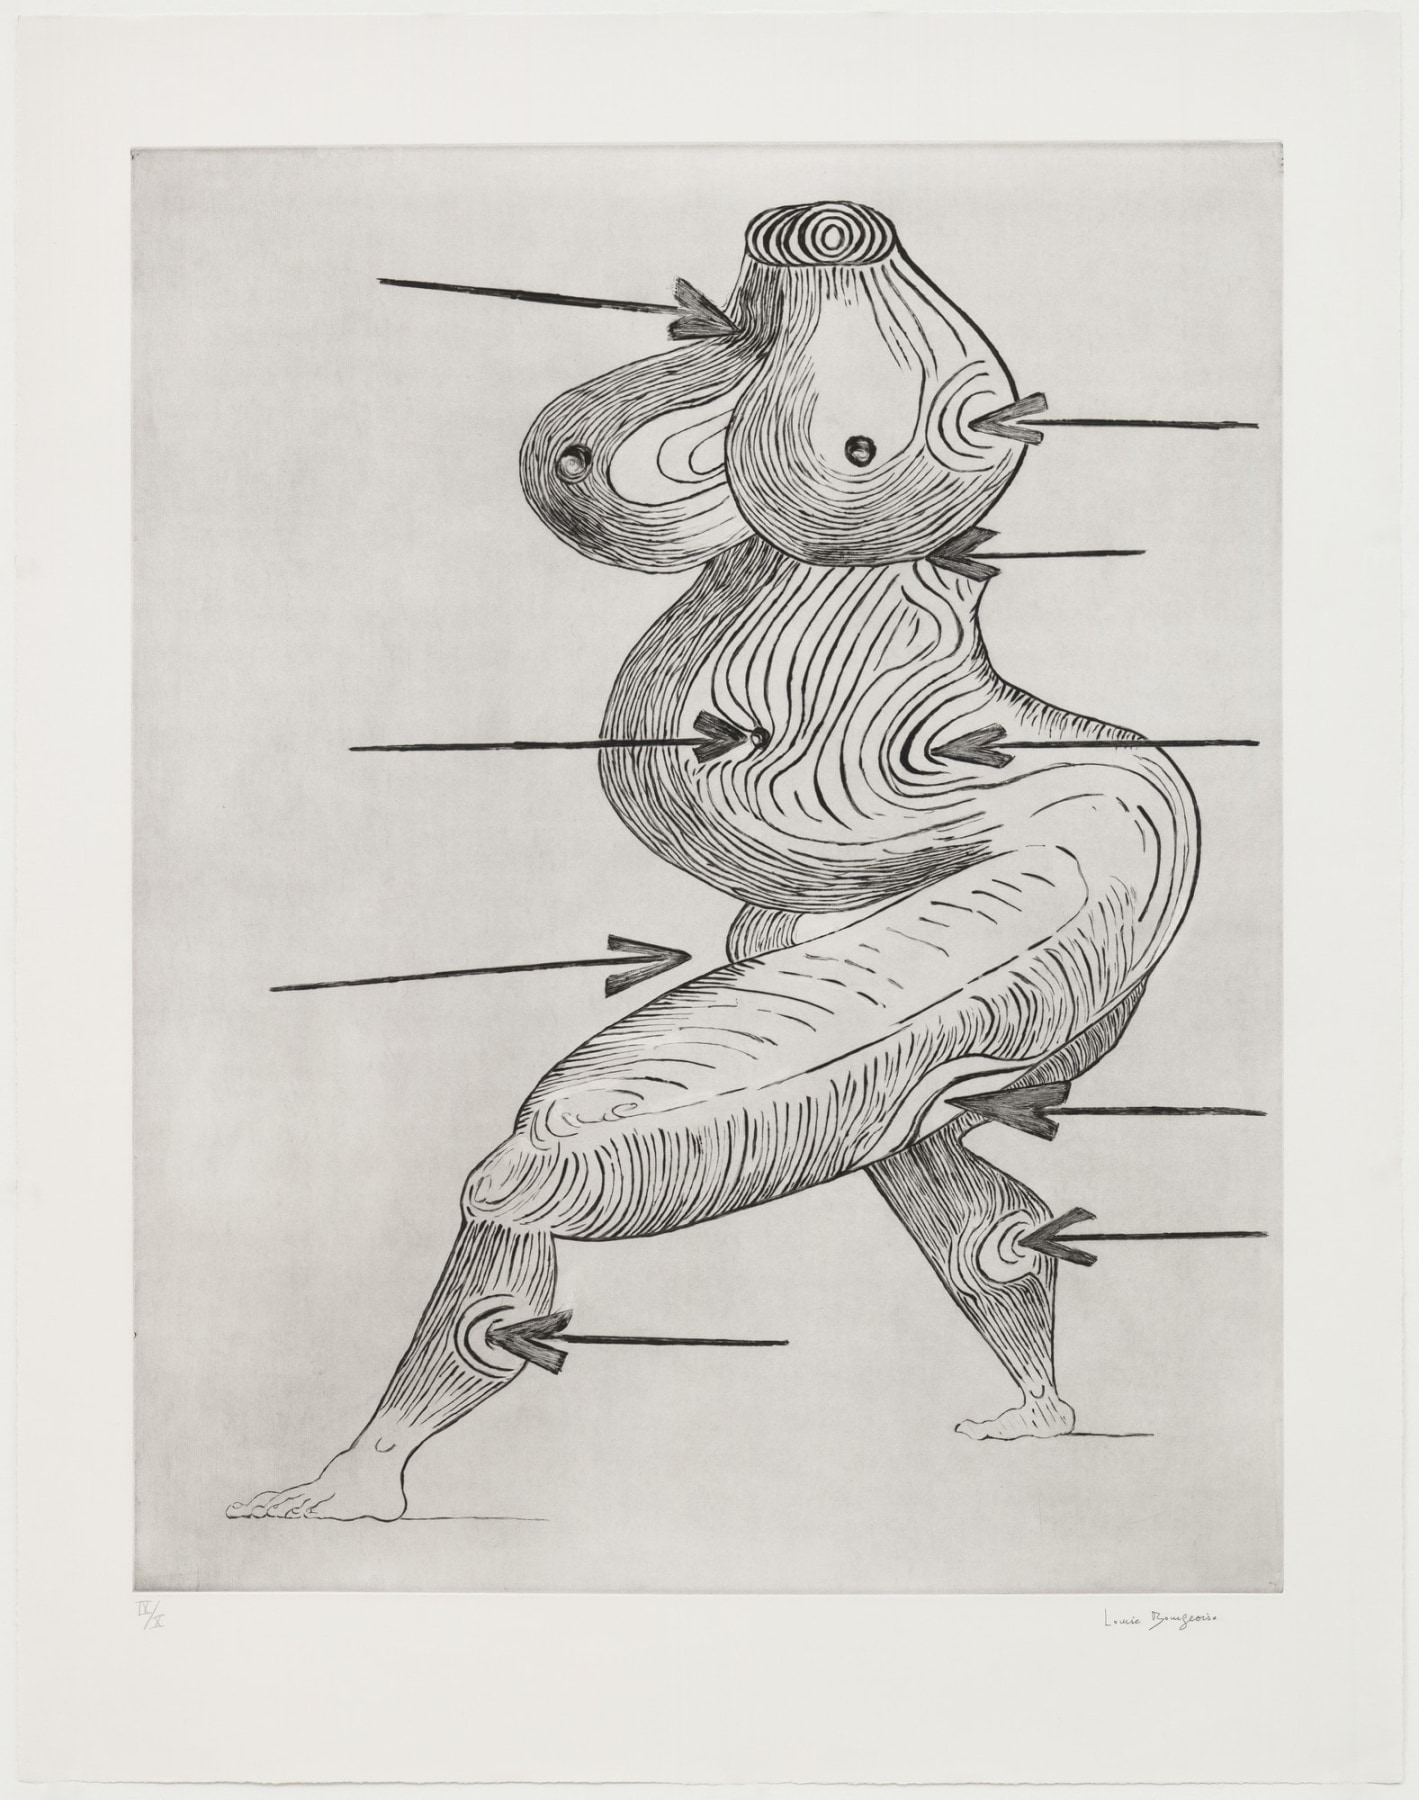 Louise Bourgeois - Peter Blum Edition - Online Viewing Room